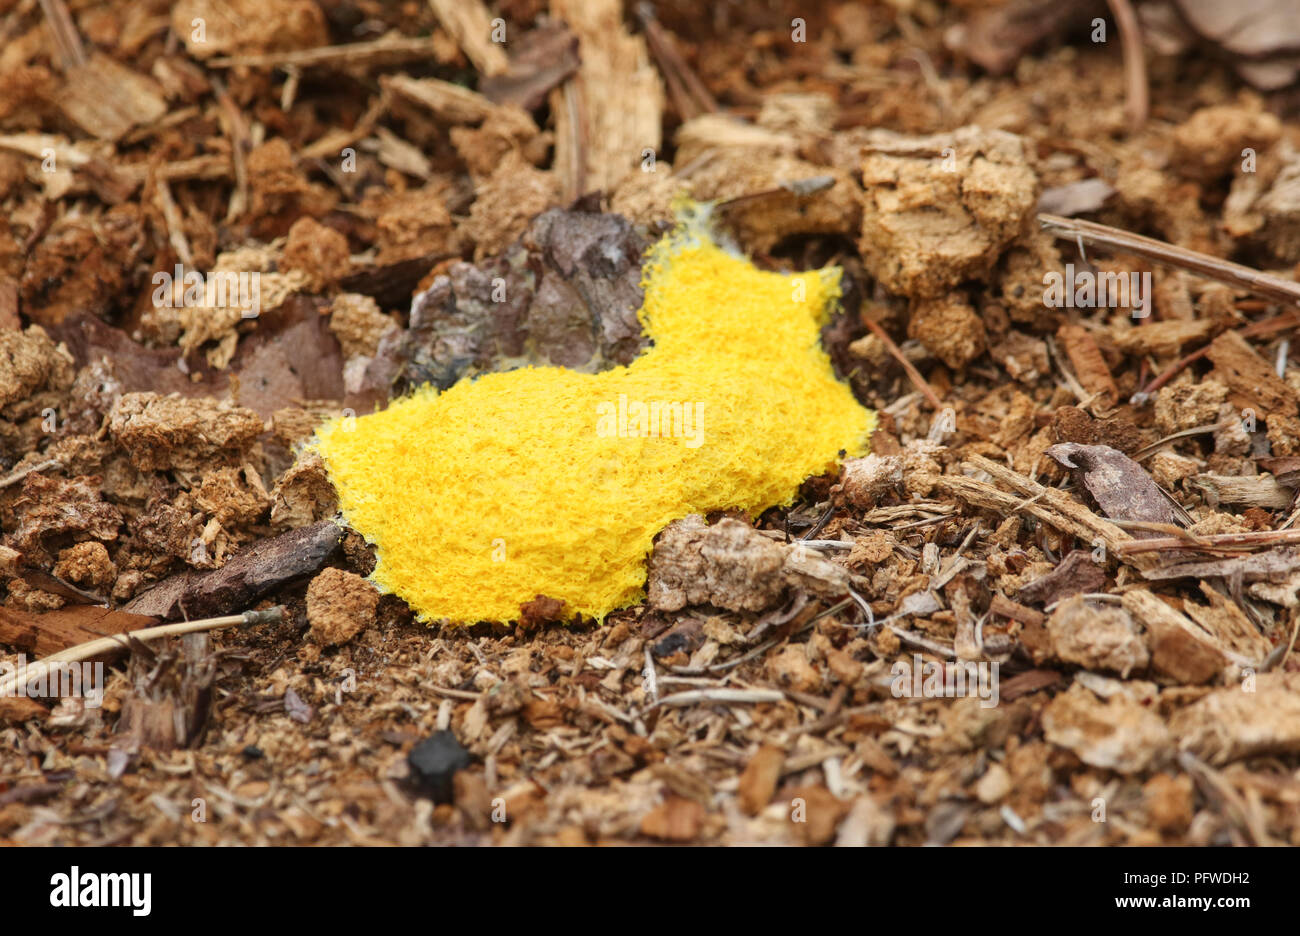 Dog Vomit Slime Mould (Fuligo septica) growing from the forest floor. Stock Photo